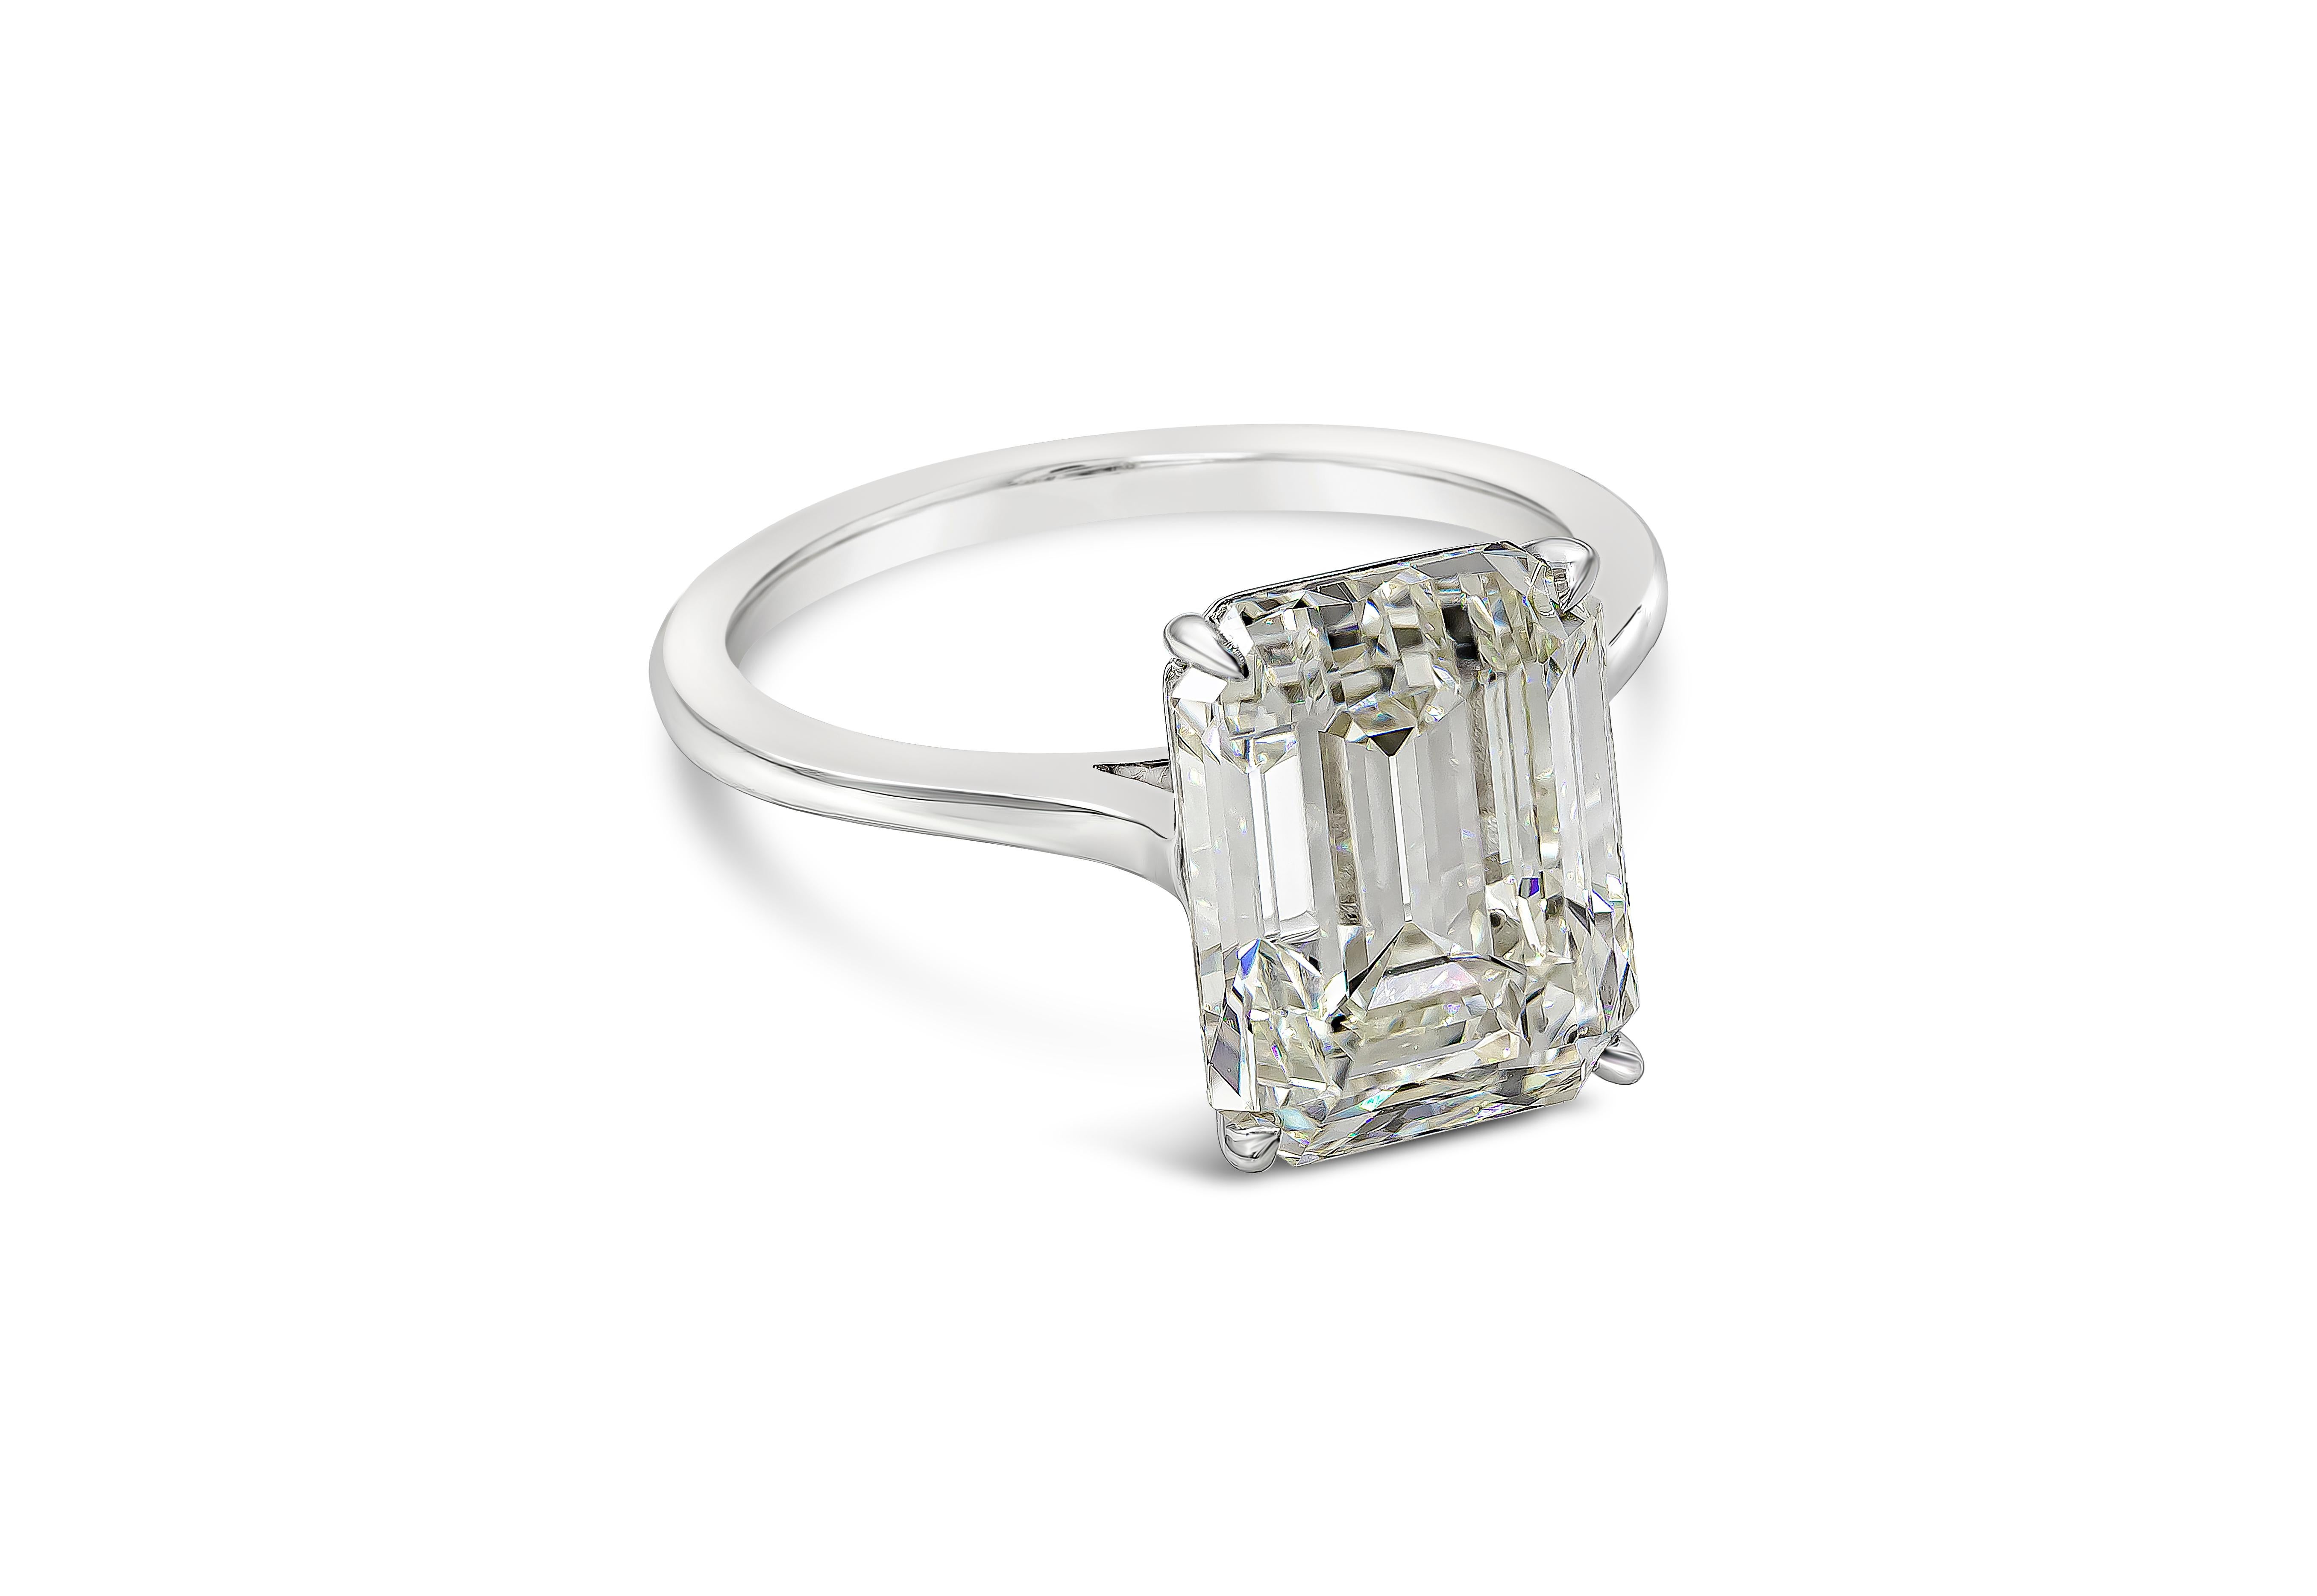 A classic and timeless engagement ring design, showcasing a 5.56 carat emerald cut diamond certified by GIA as K color and VVS2 clarity, set in a thin mounting made of 18K white gold. Size 6.5 US, resizable upon request.

Roman Malakov is a custom